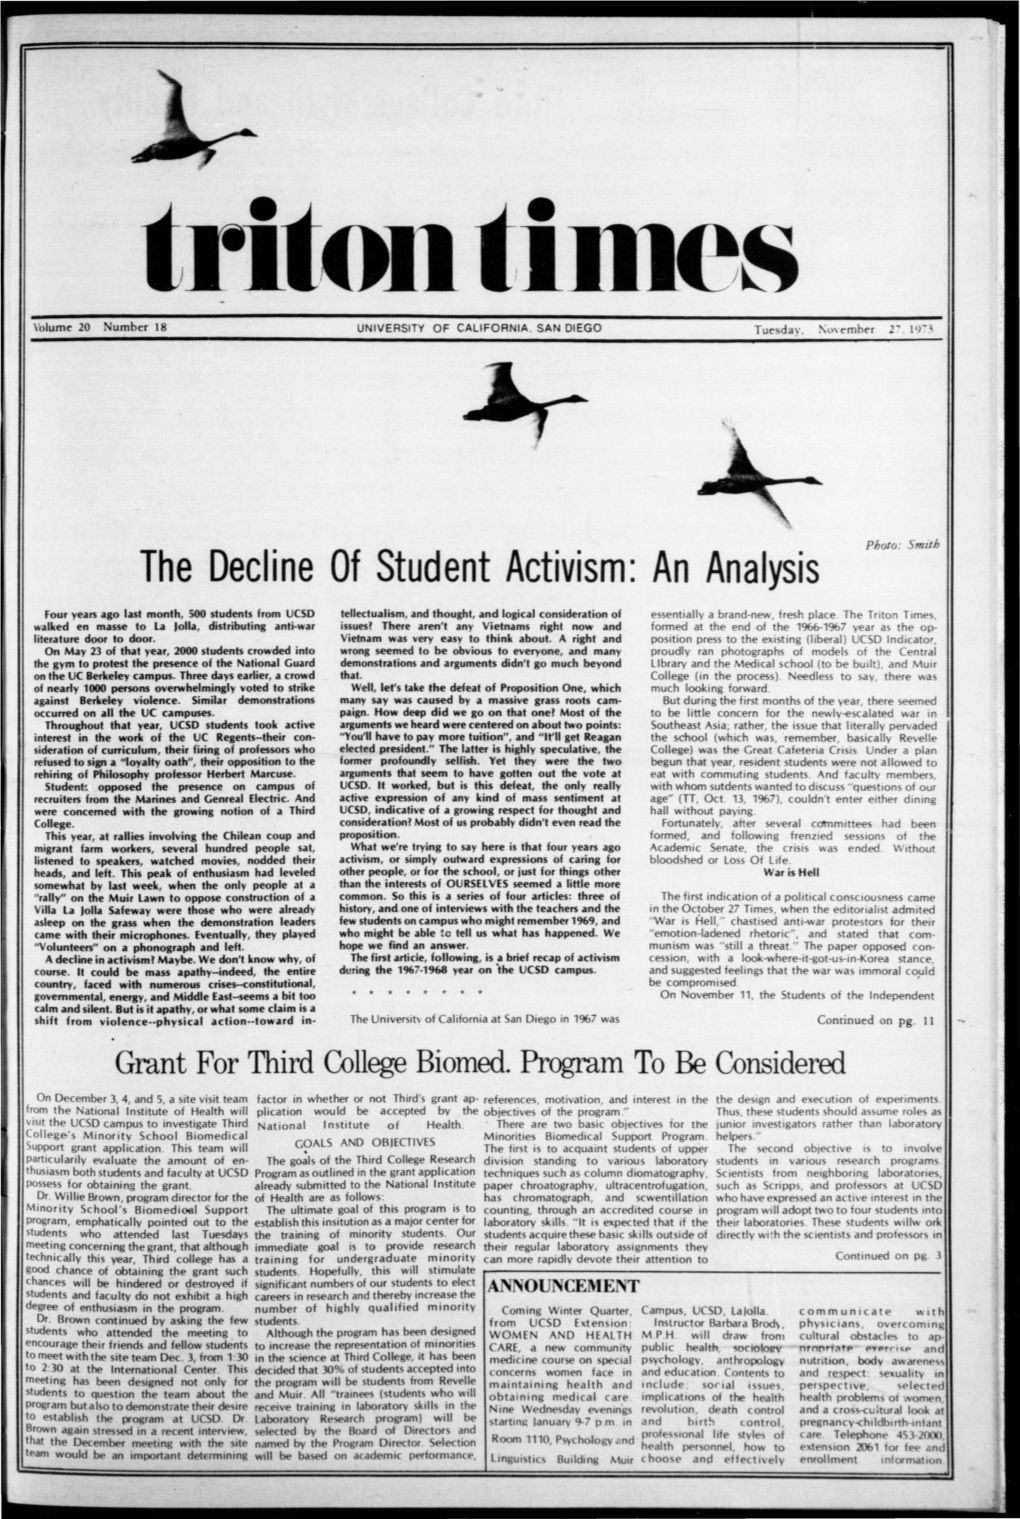 The Decline of Student Activism: an Analysis